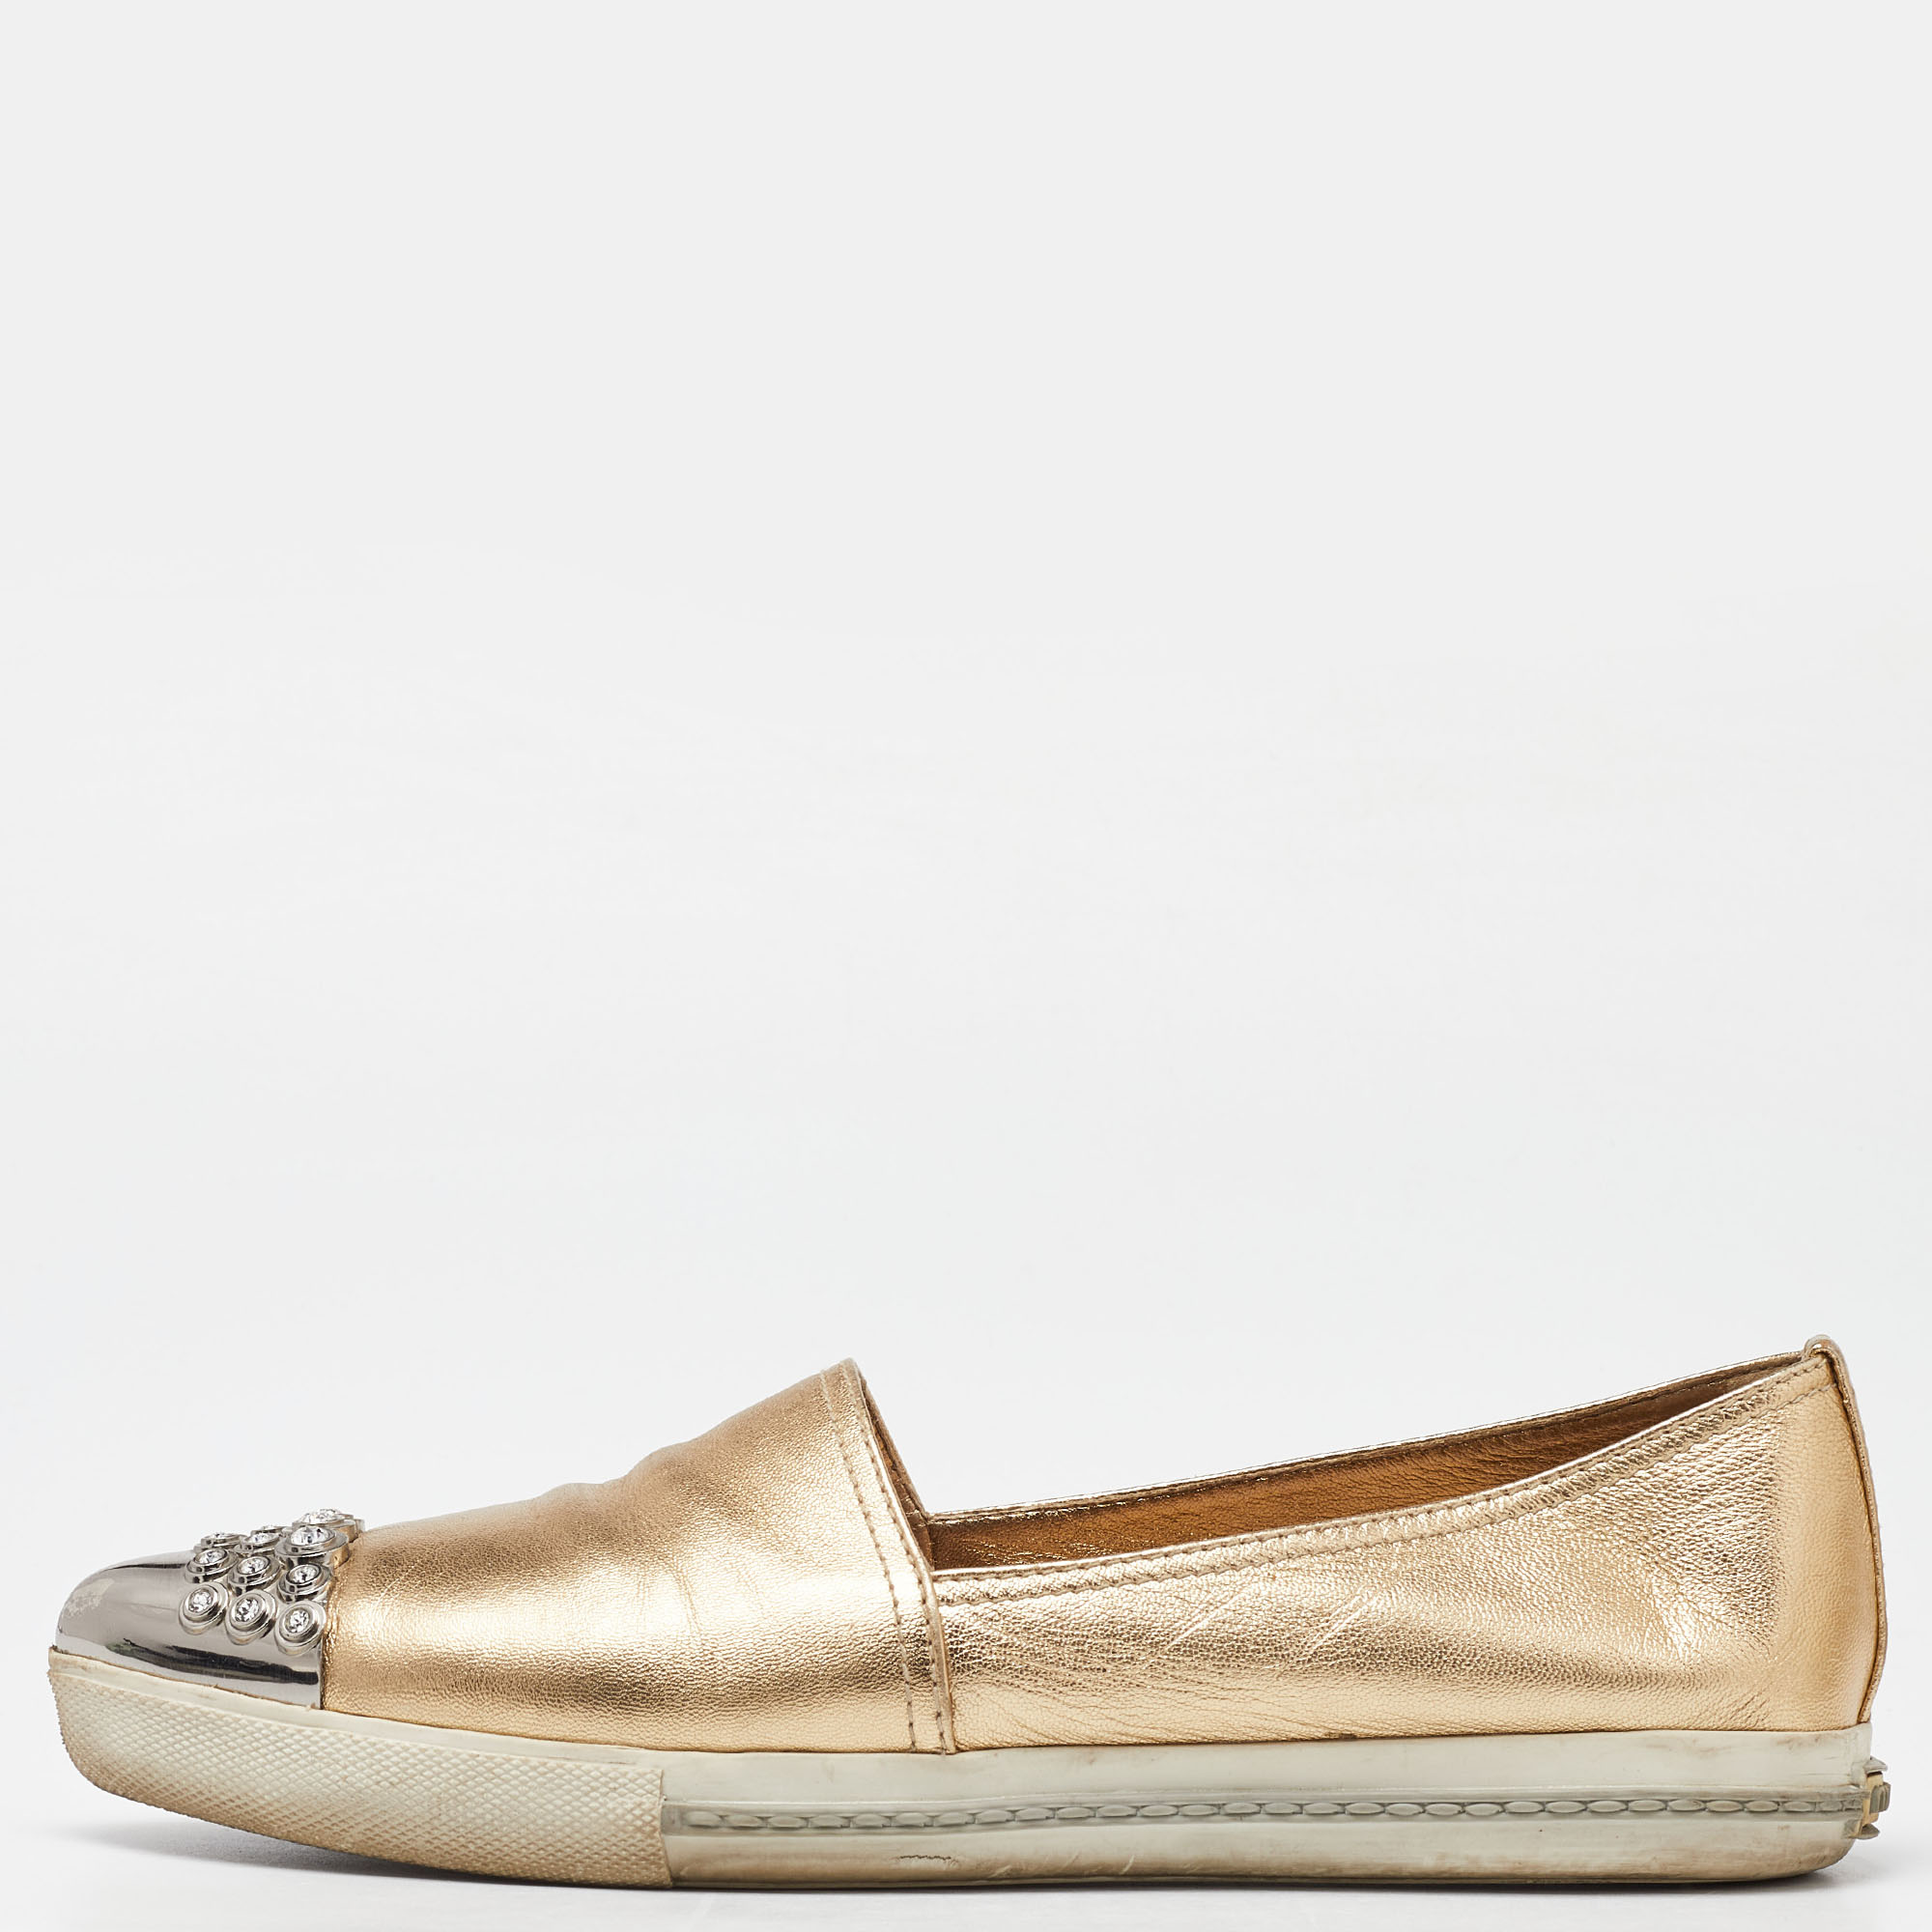 Miu miu gold foil leather crystal embellished slip on sneakers size 41